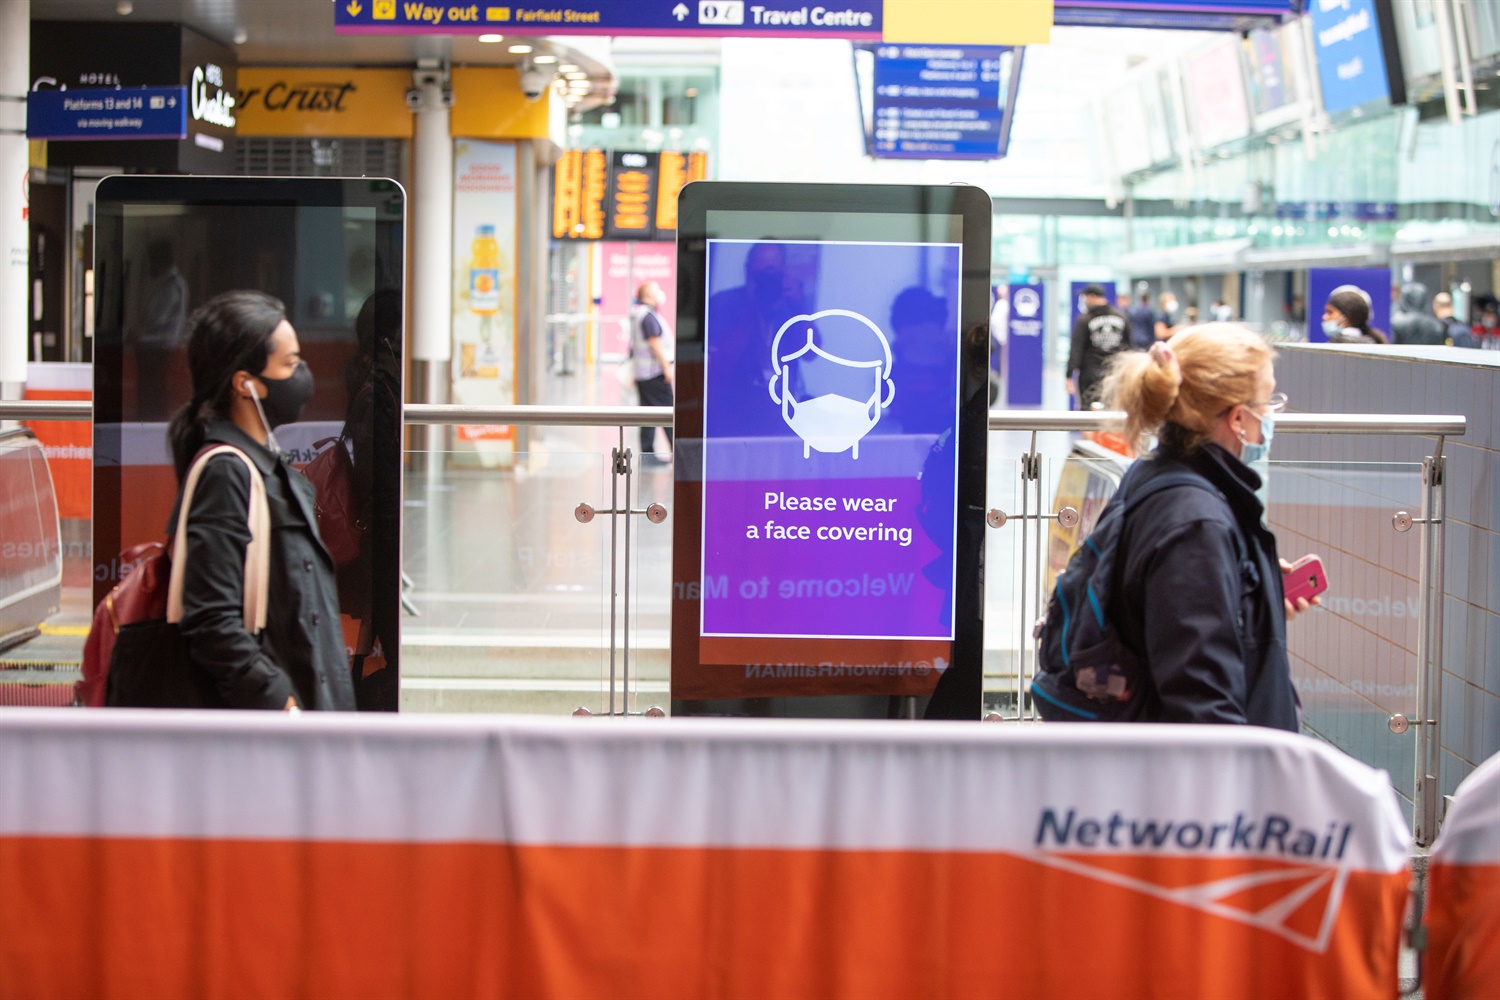 Network Rail introduces further safety measures as more passengers return 